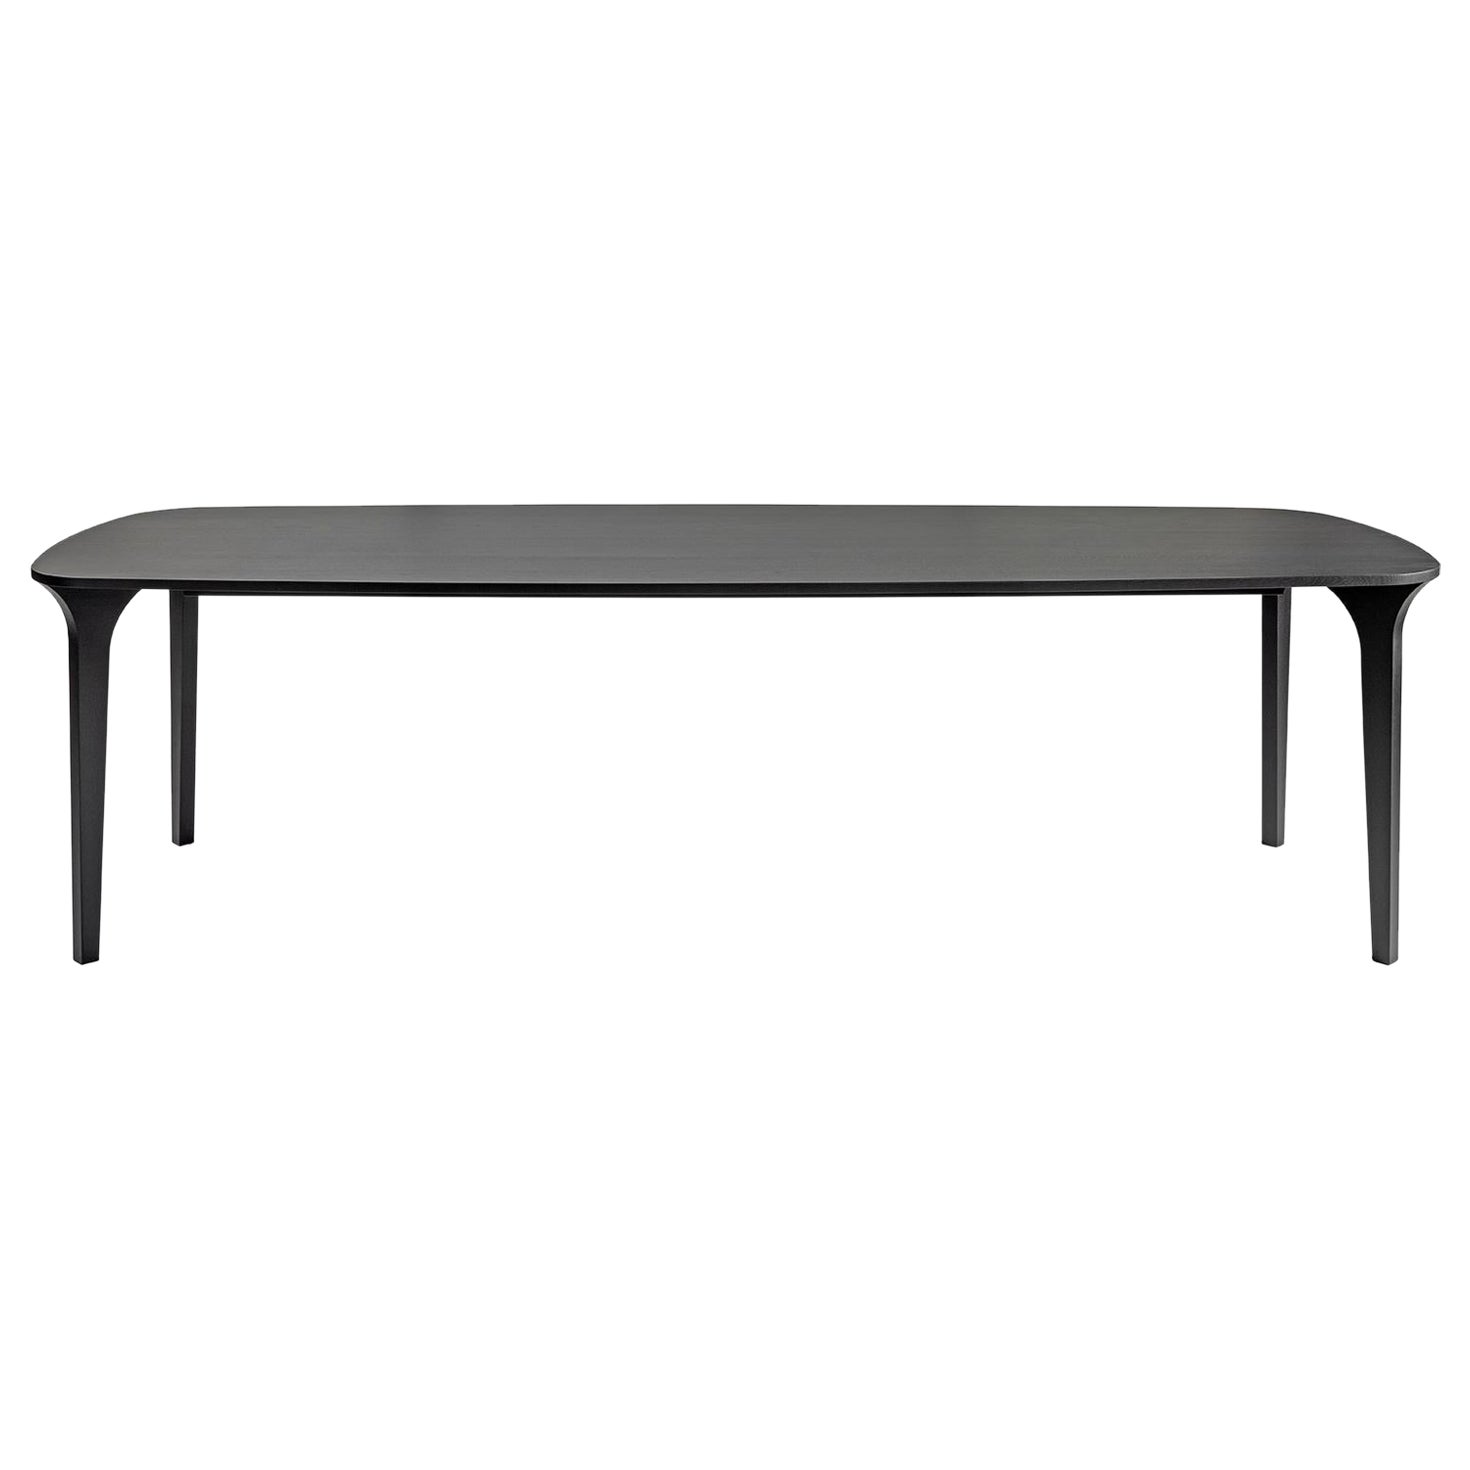 Kluskens Ballerina Dining Table For Sale